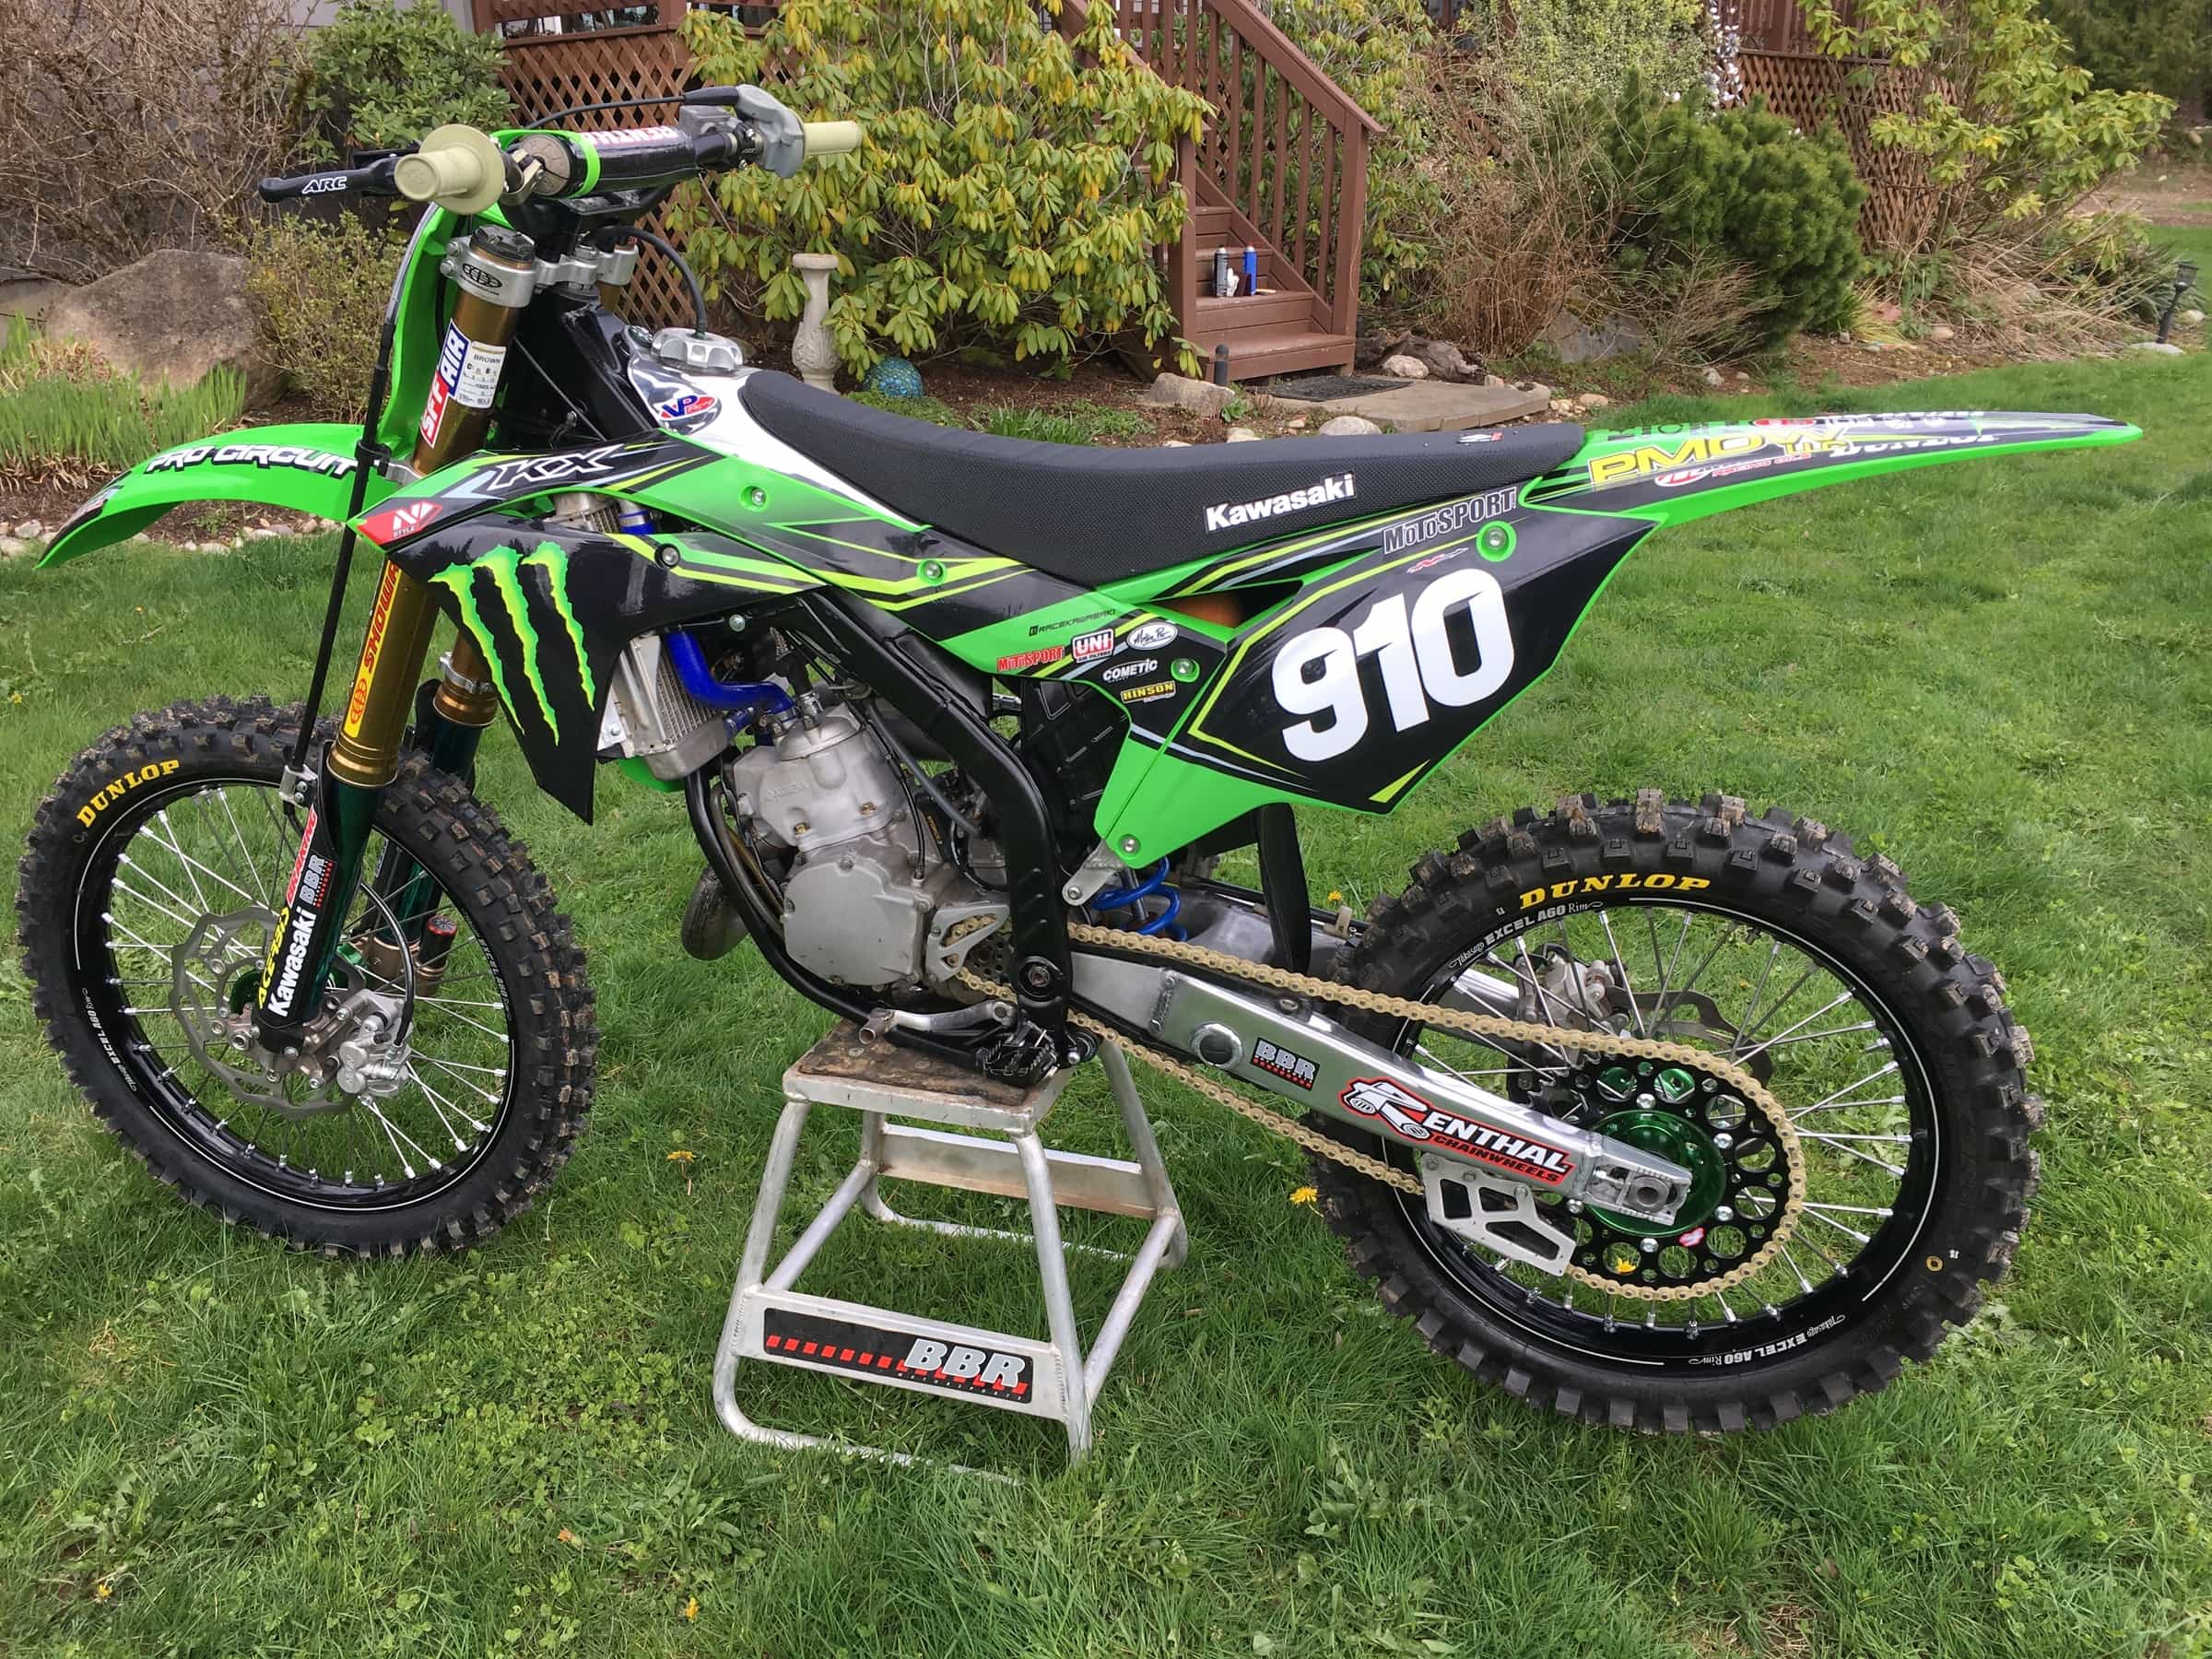 TWOSTROKE TUESDAY THE KX125 OF THE FUTURE Motocross Action Magazine